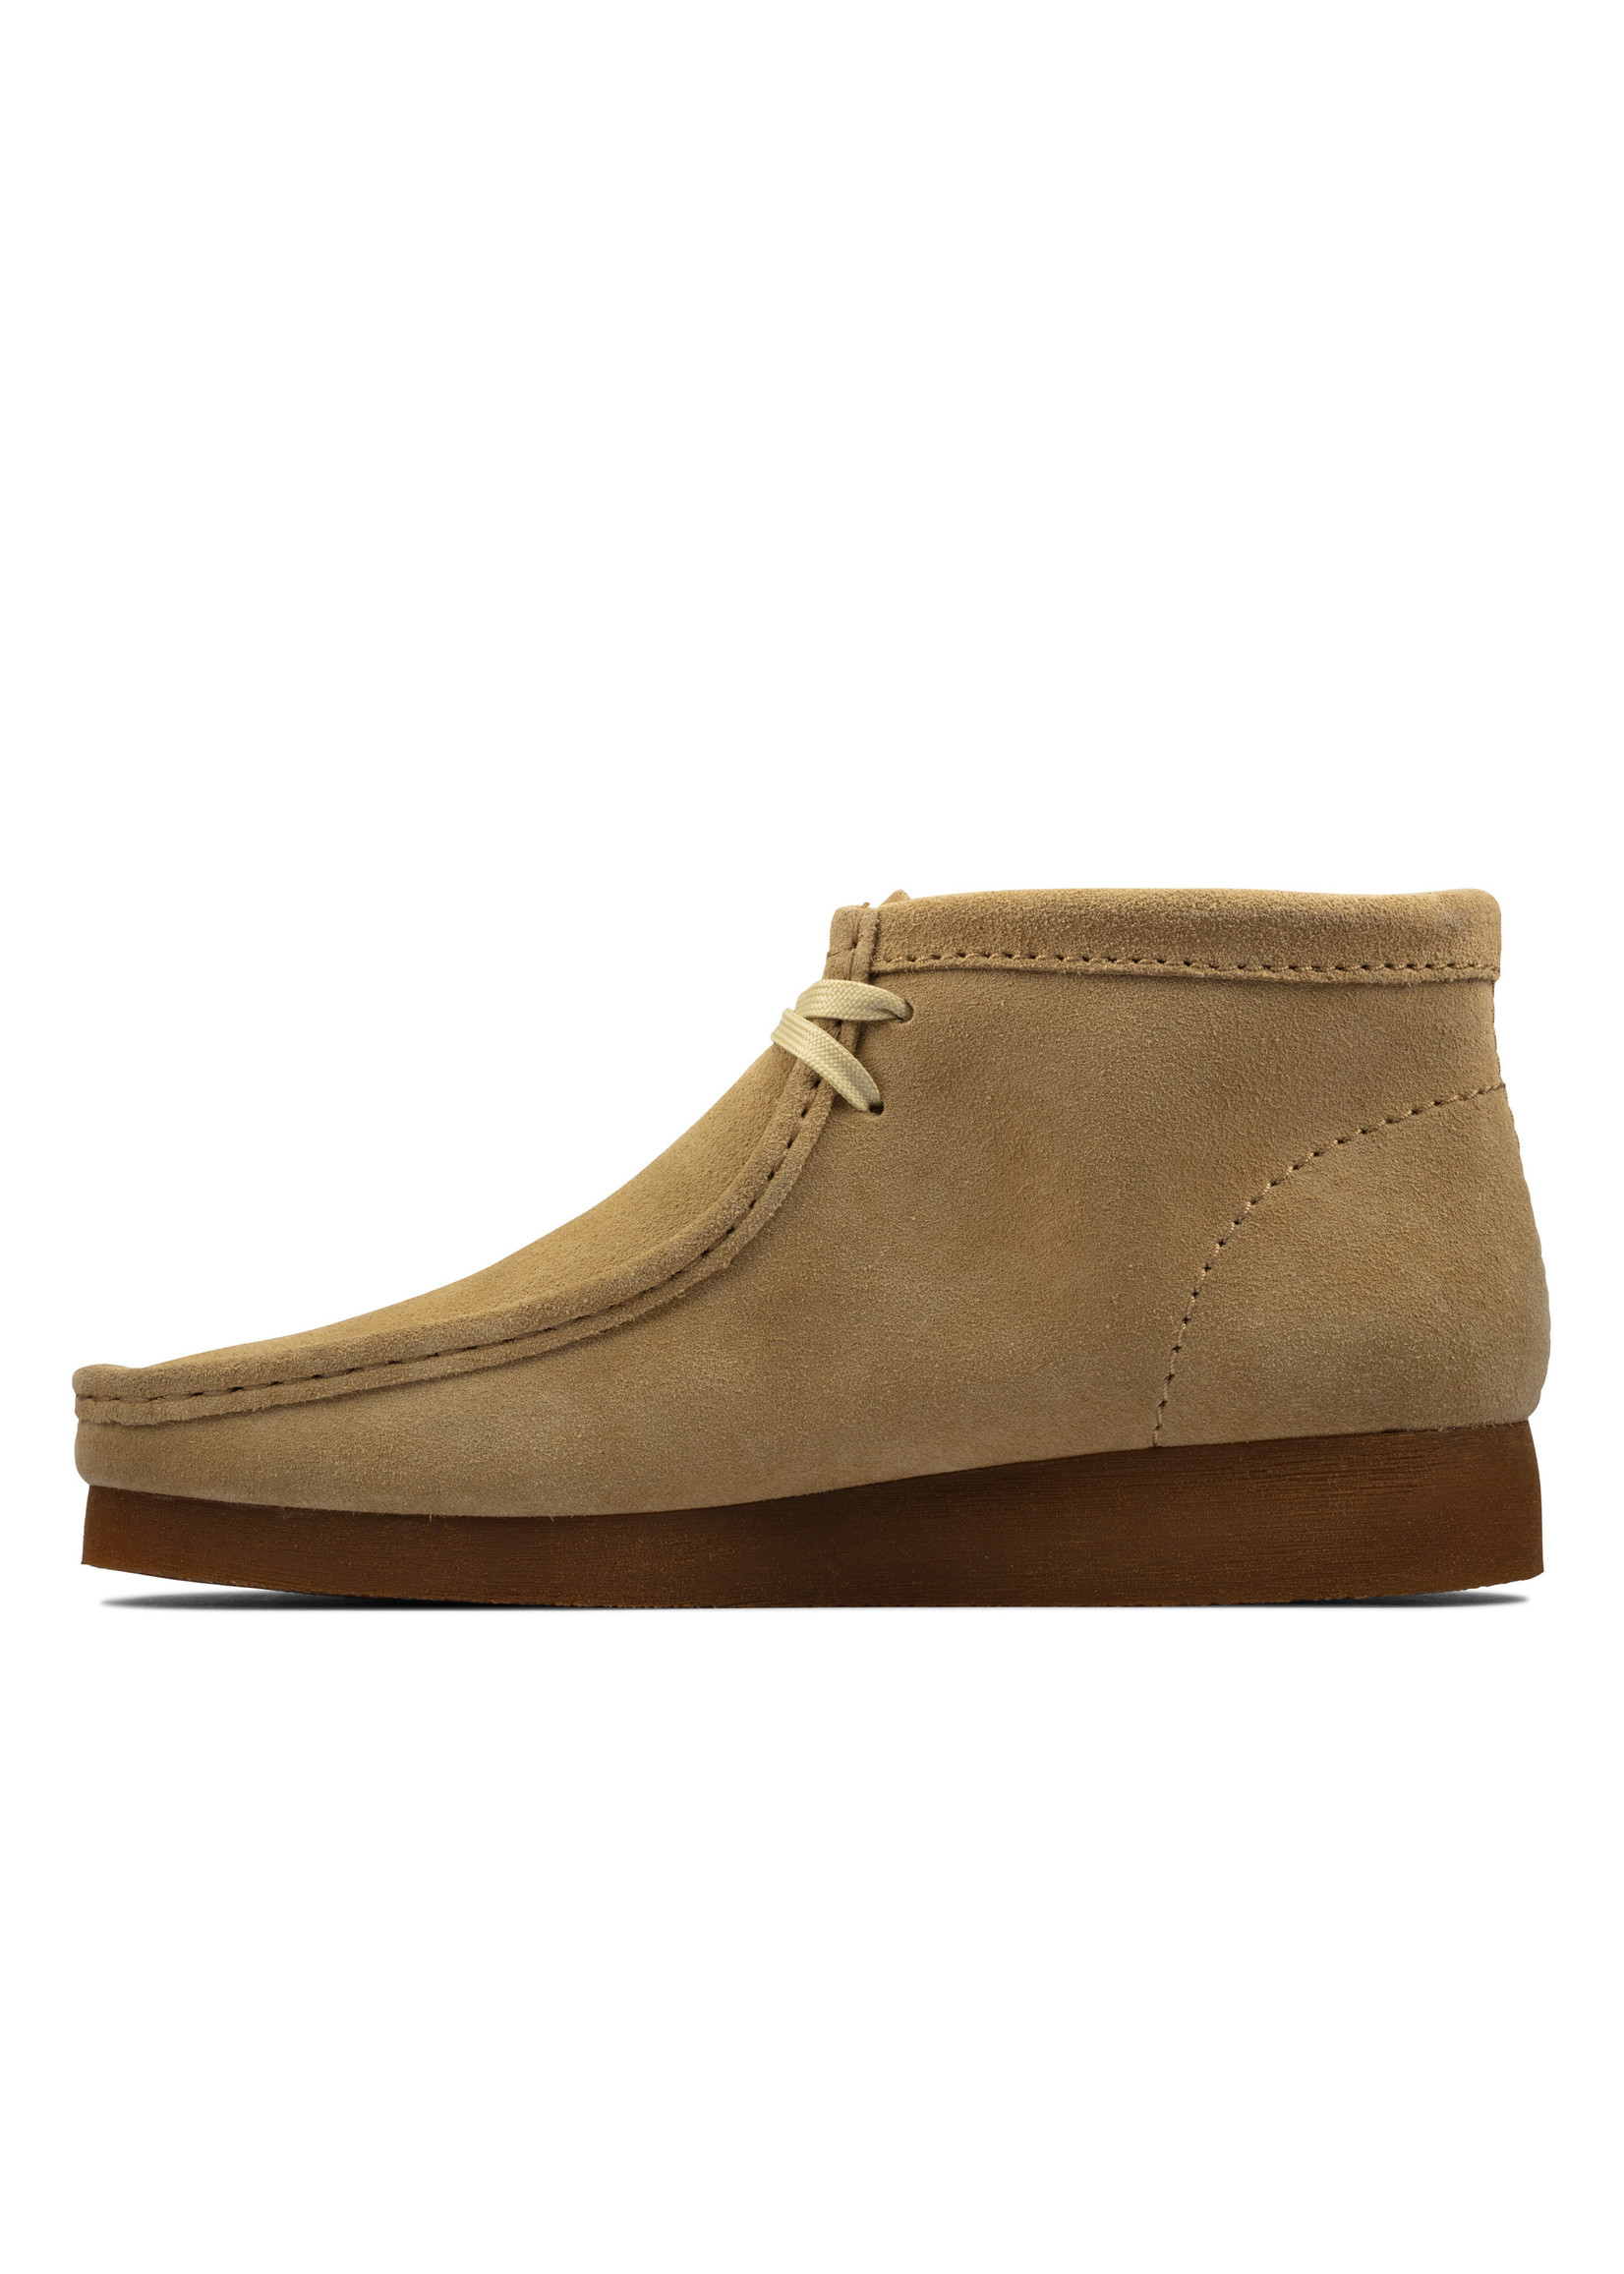 Clarks Wallabee Boot2 Maple Suede